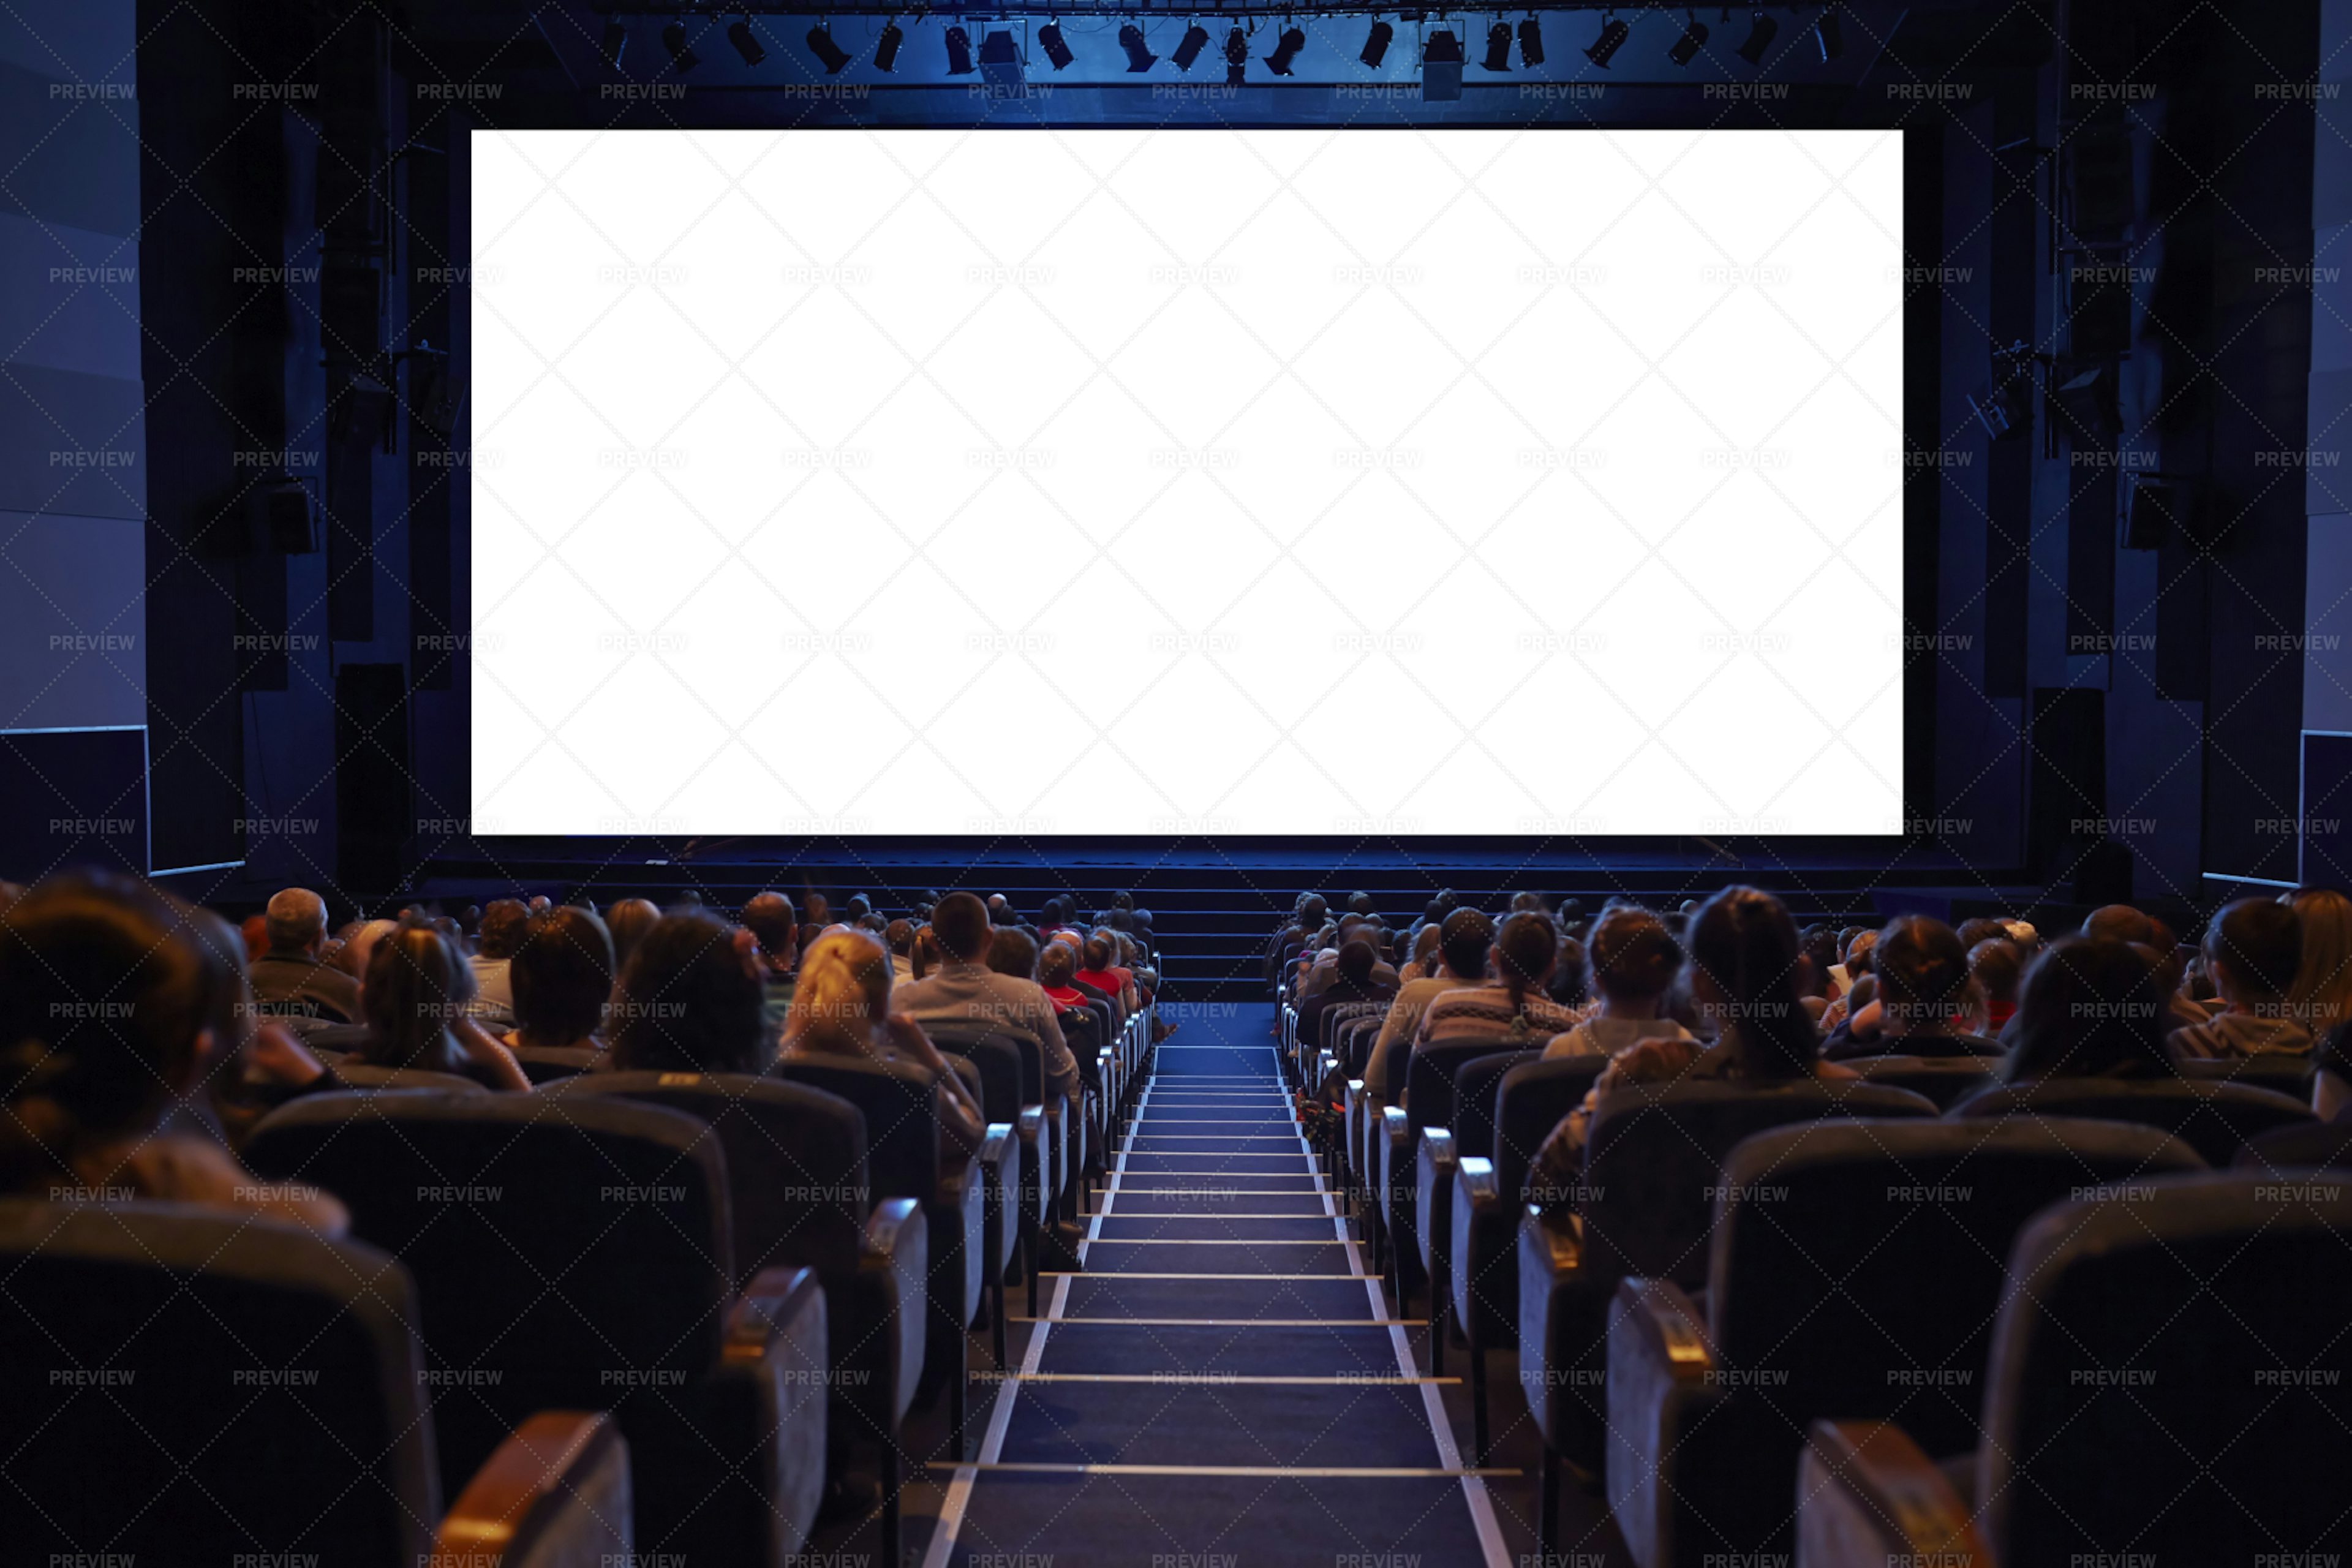 White Cinema Screen With Audience Stock Photos Motion Array